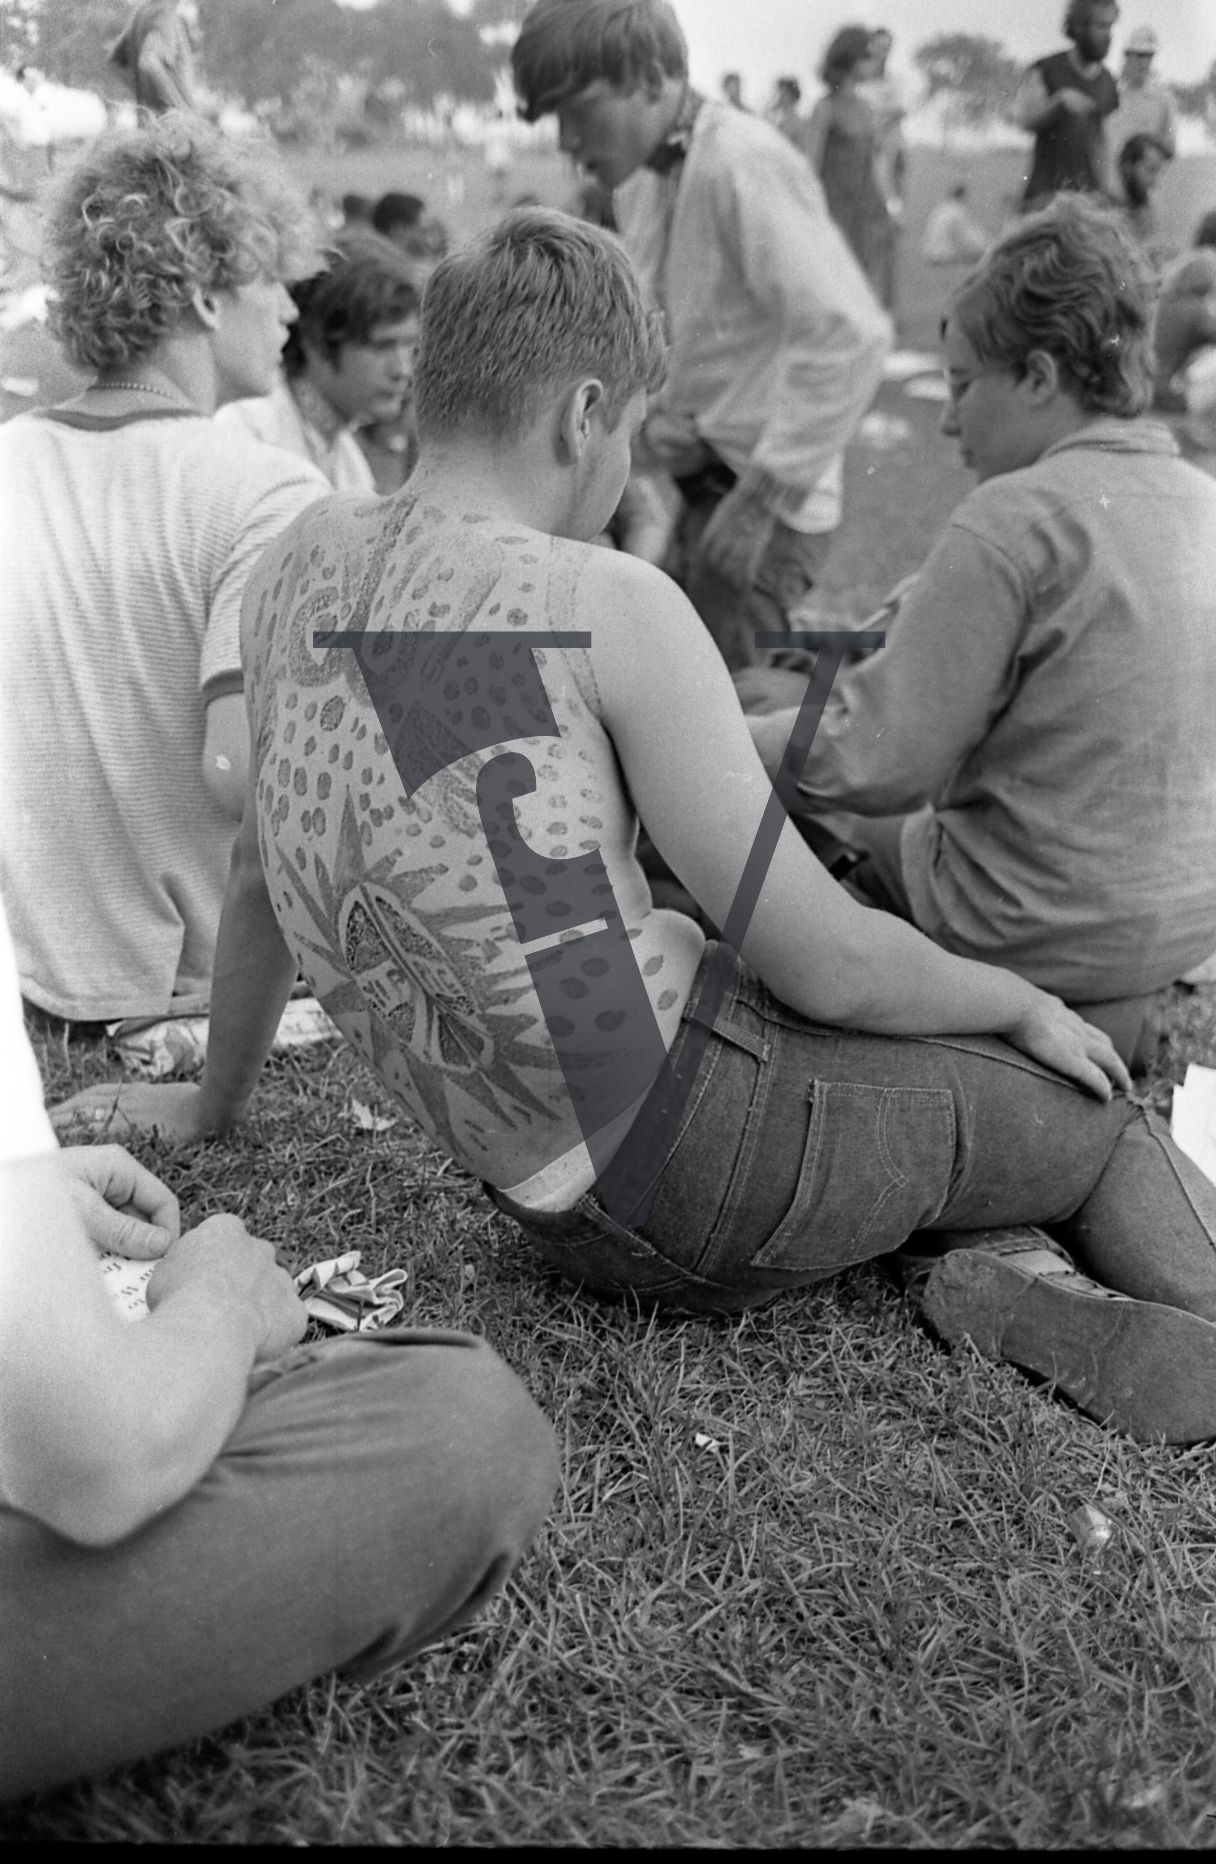 Chicago, Anti-war rallies in Lincoln Park, shot of man with full back tattoo reads Yippie.